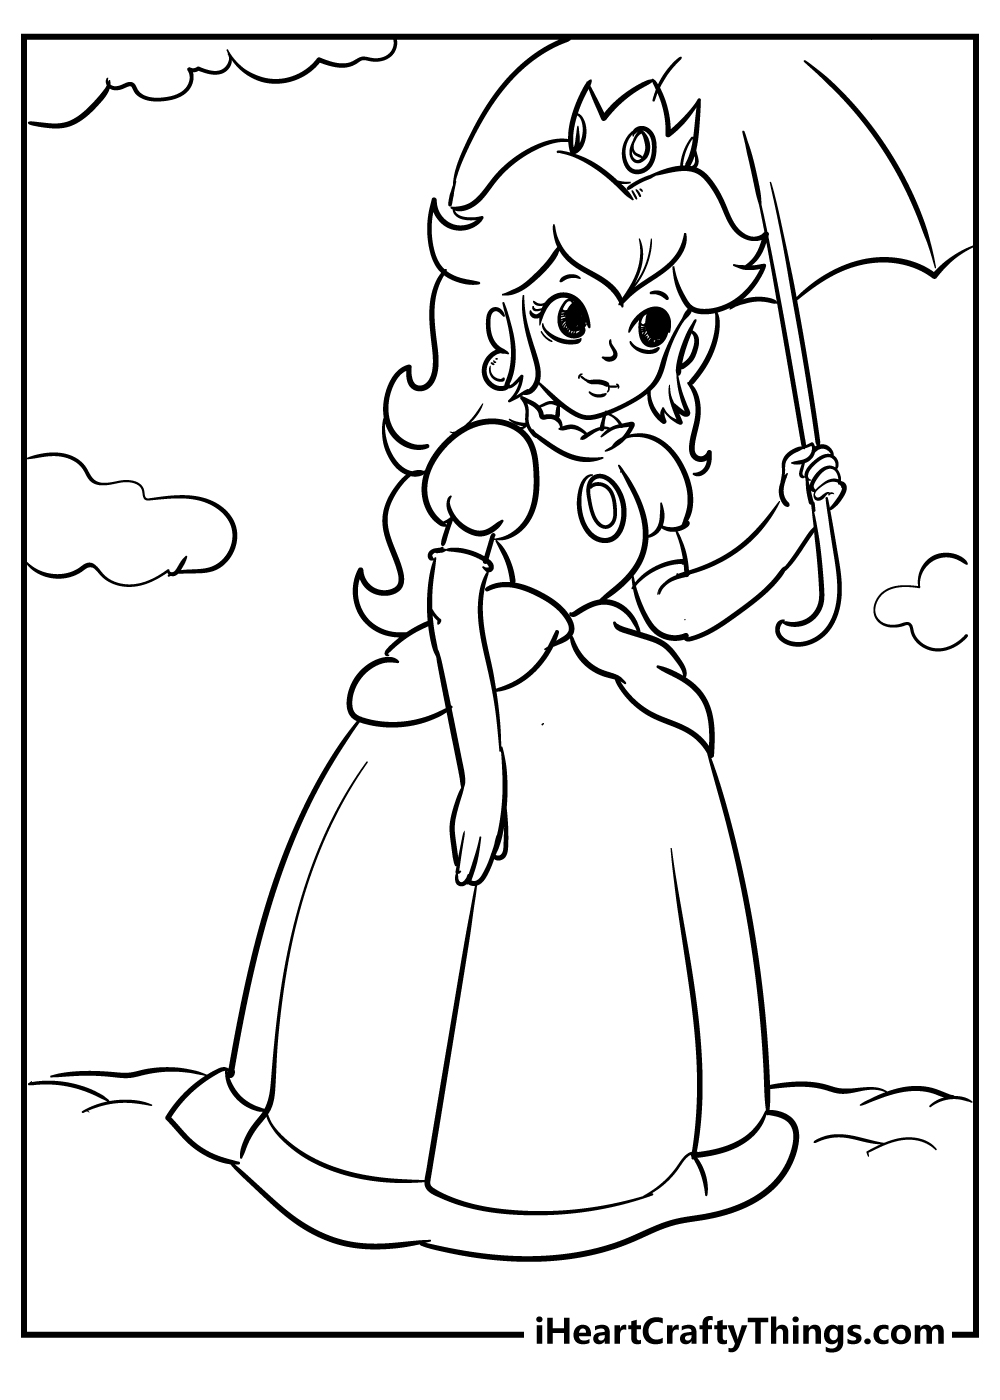 Princess Peach Coloring Pages for Kids 65